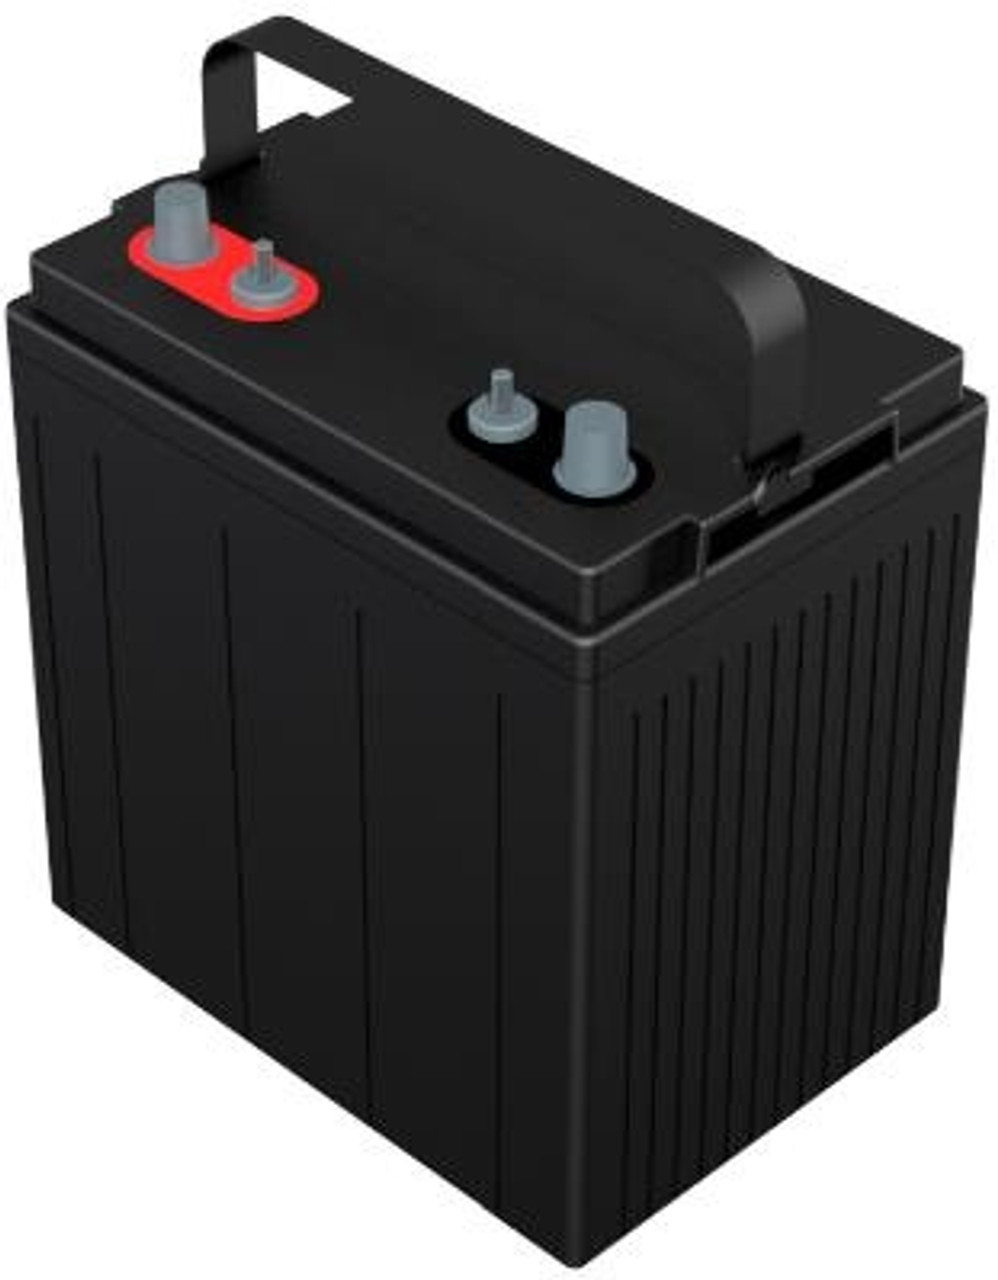 Raion Power RG-GC8-165-DT Replacement Battery for Club Car Carryall 232 Utility Vehicle